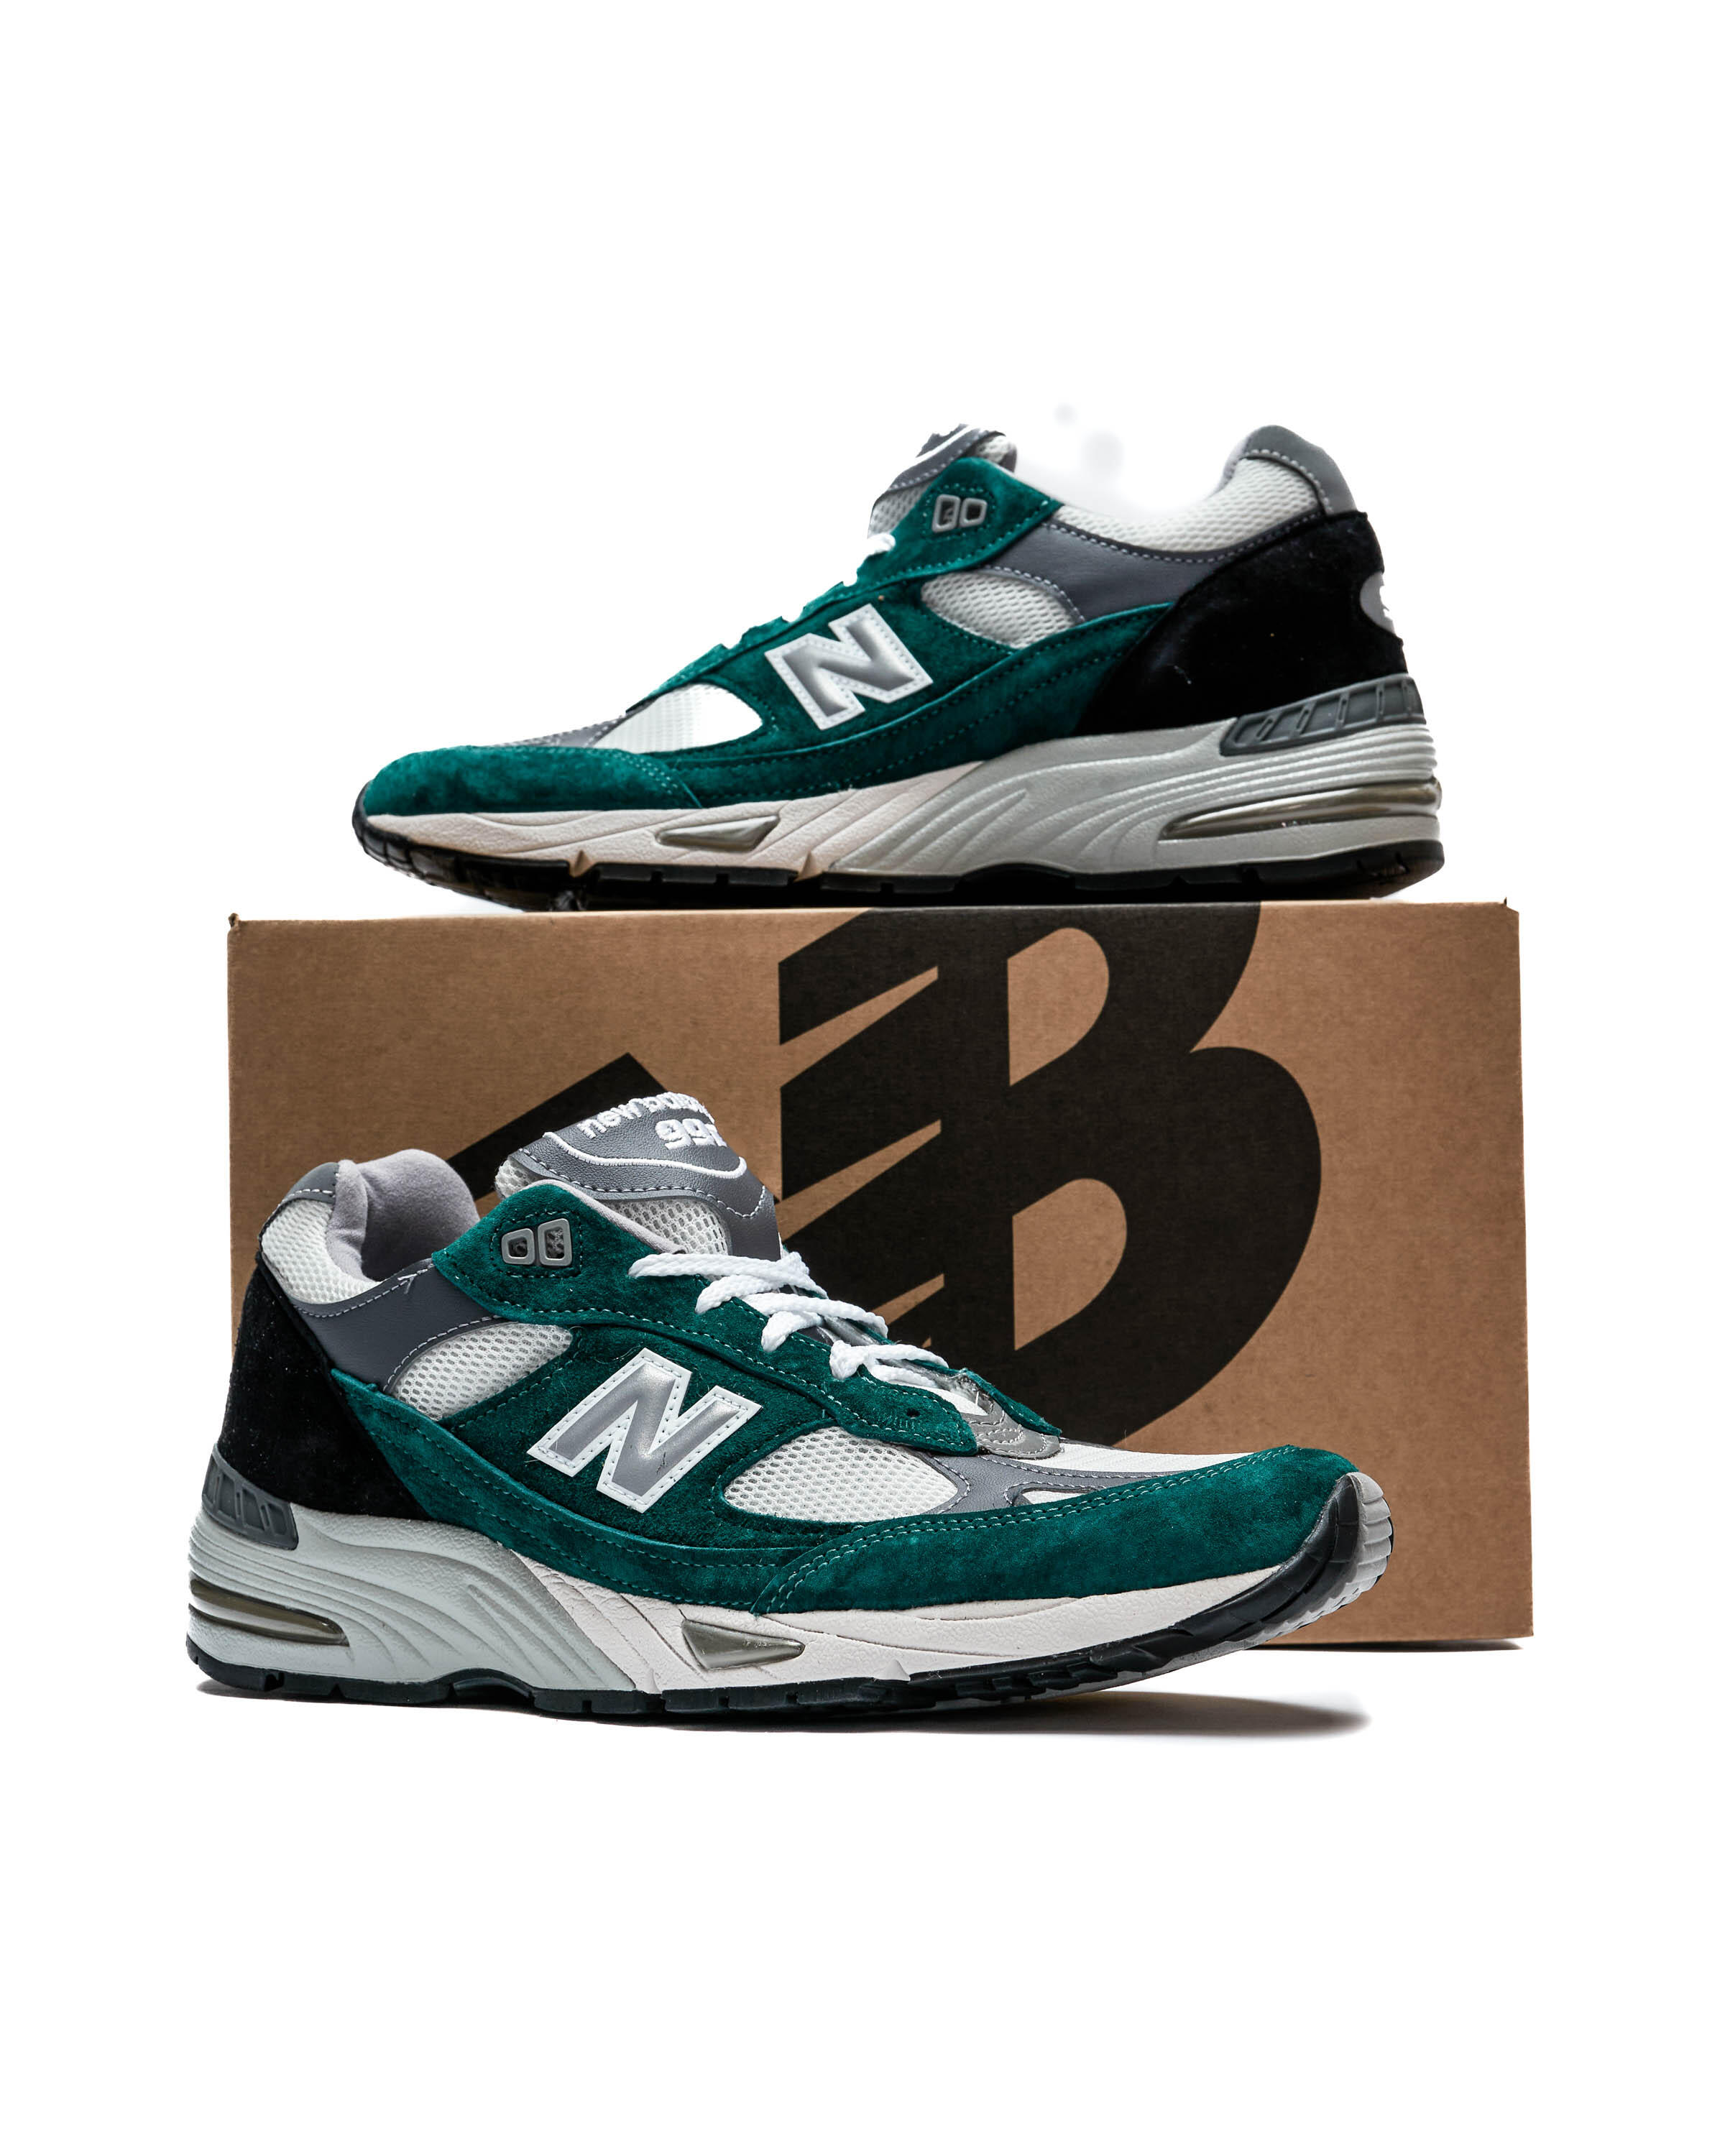 New Balance M 991 TLK - Made in England